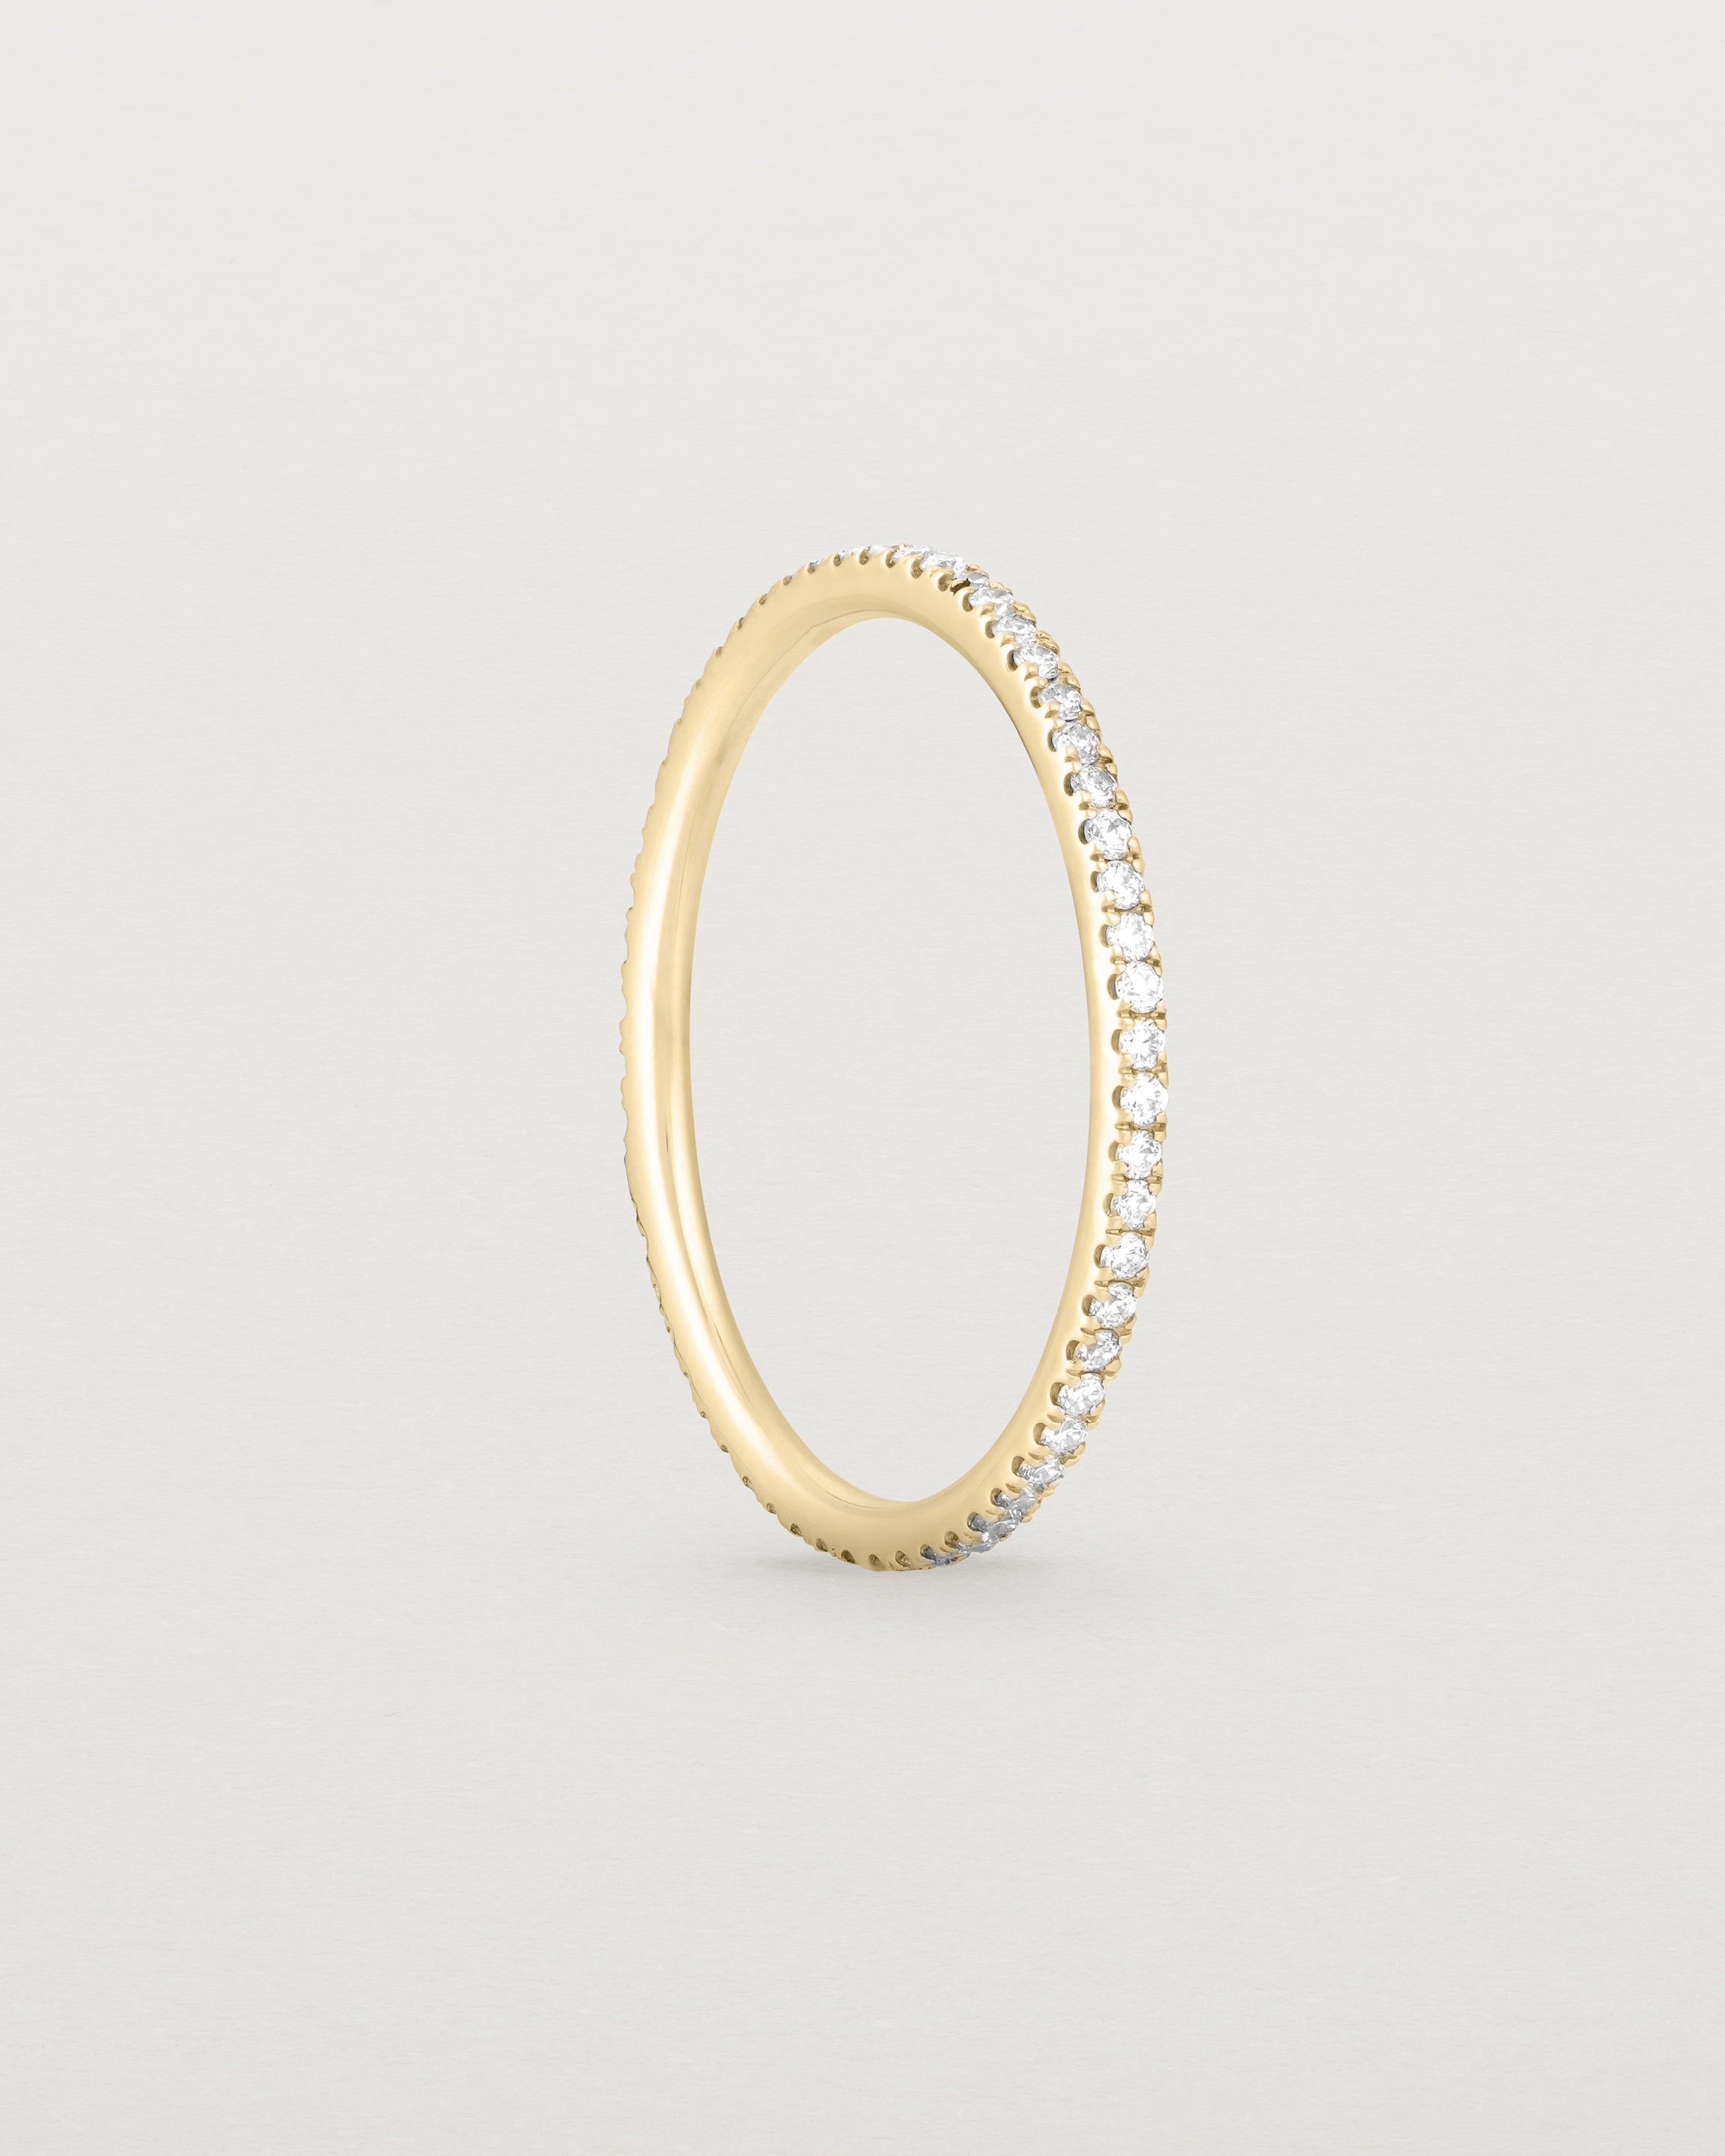 Standing view of a full yellow gold band featuring white diamonds